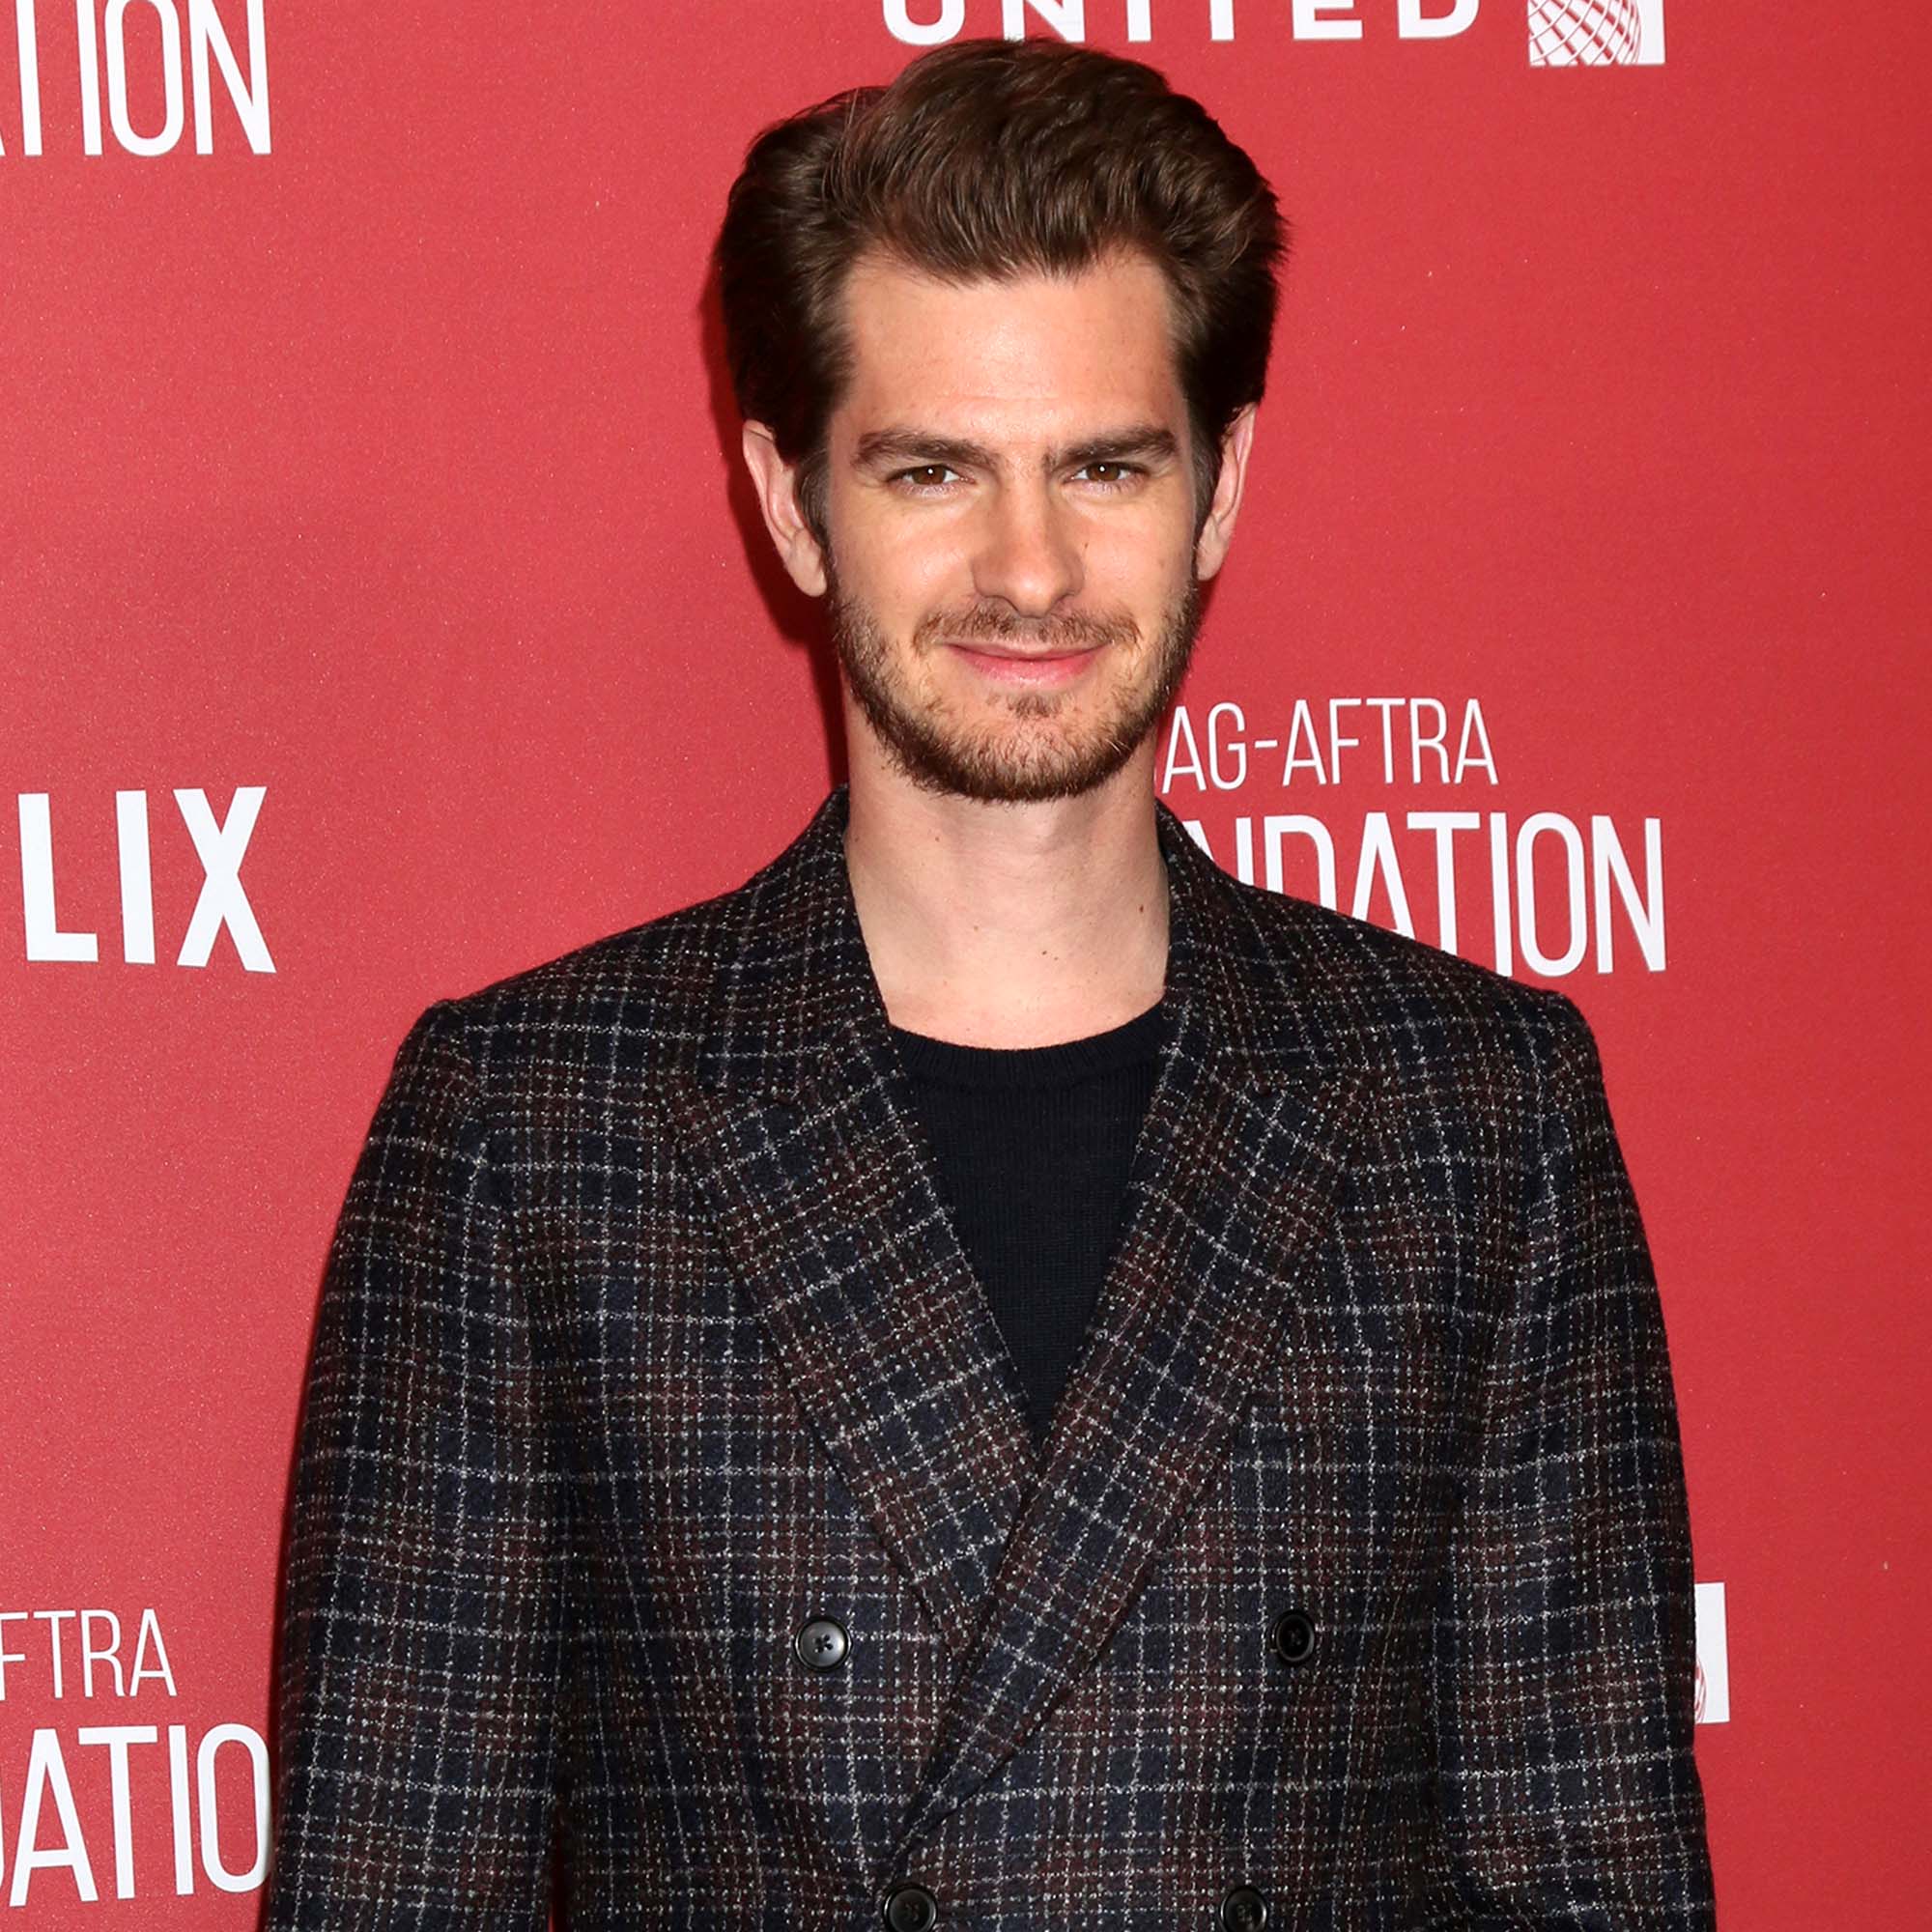 Andrew Garfield 'Did Not Get a Call' About 'Spider-Man' Cameo